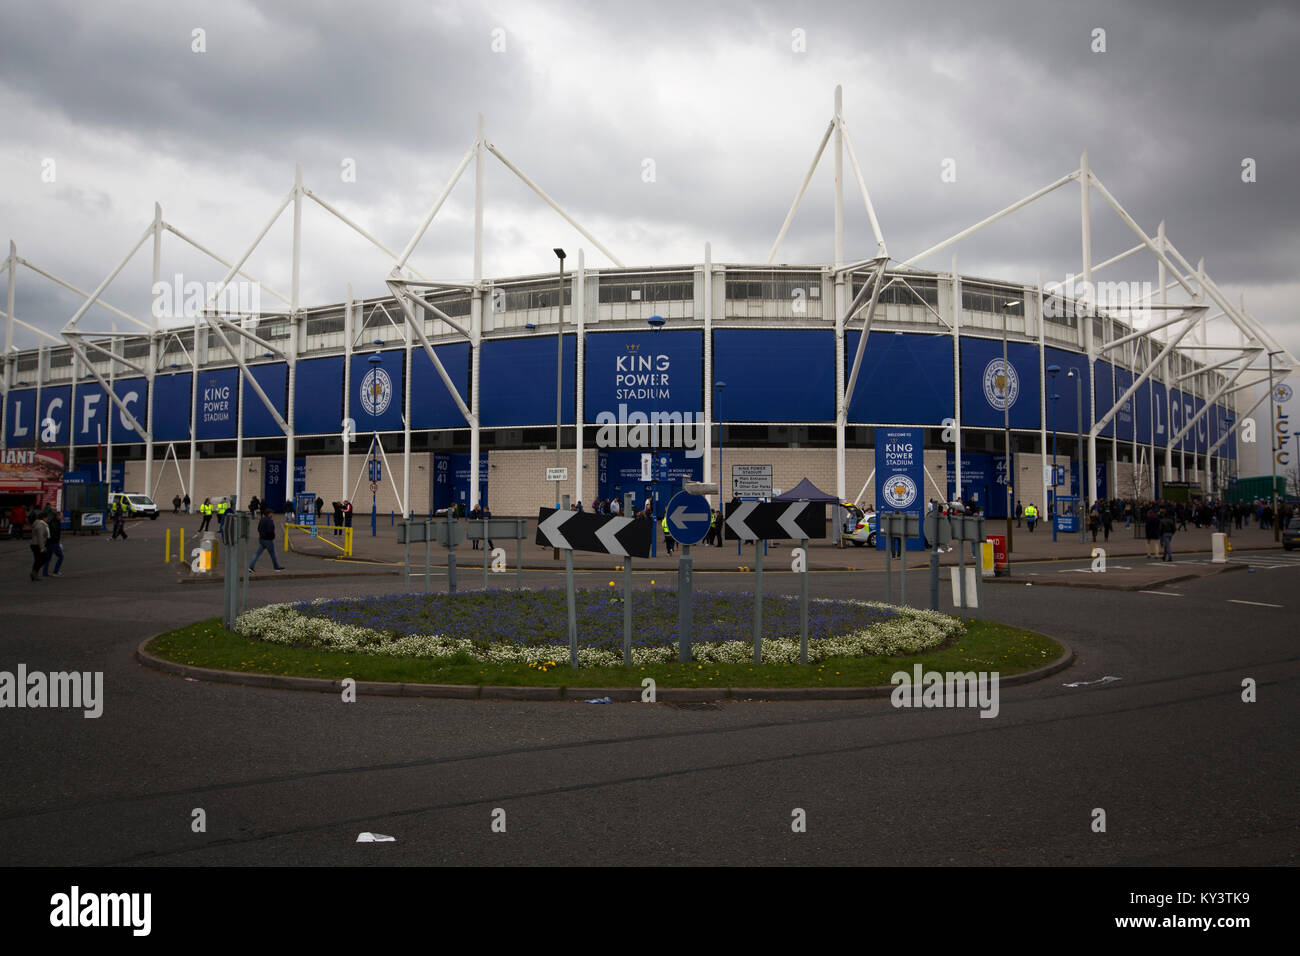 The King Power Stadium, pictured before Leicester City hosted Swansea City in an English Premier League fixture. in the English city of Leicester. Leicester City FC were on the brink of being surprise winners of the English Premier League in the 2015-16 season. On that day, they defeated their visitors by fours goals to nil to open up and eight point lead at the top of the table. Stock Photo